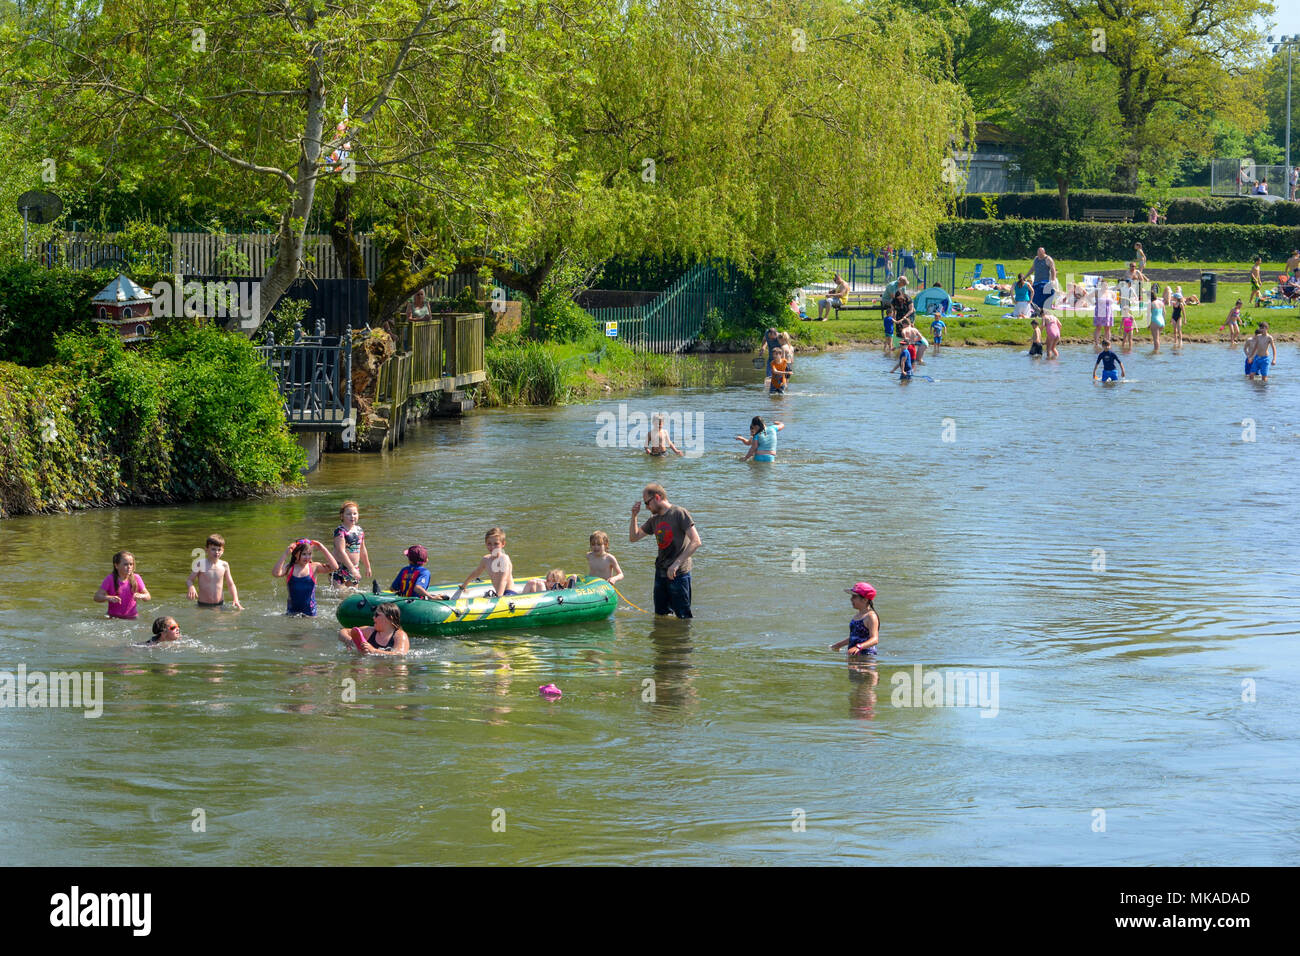 Families enjoying a bank holiday heatwave on the riverbank and cooling off in the water of the River Avon in Fordingbridge, Hampshire, UK, May 2018. A hot, sunny day with temperature records day being broken across southern England. Stock Photo